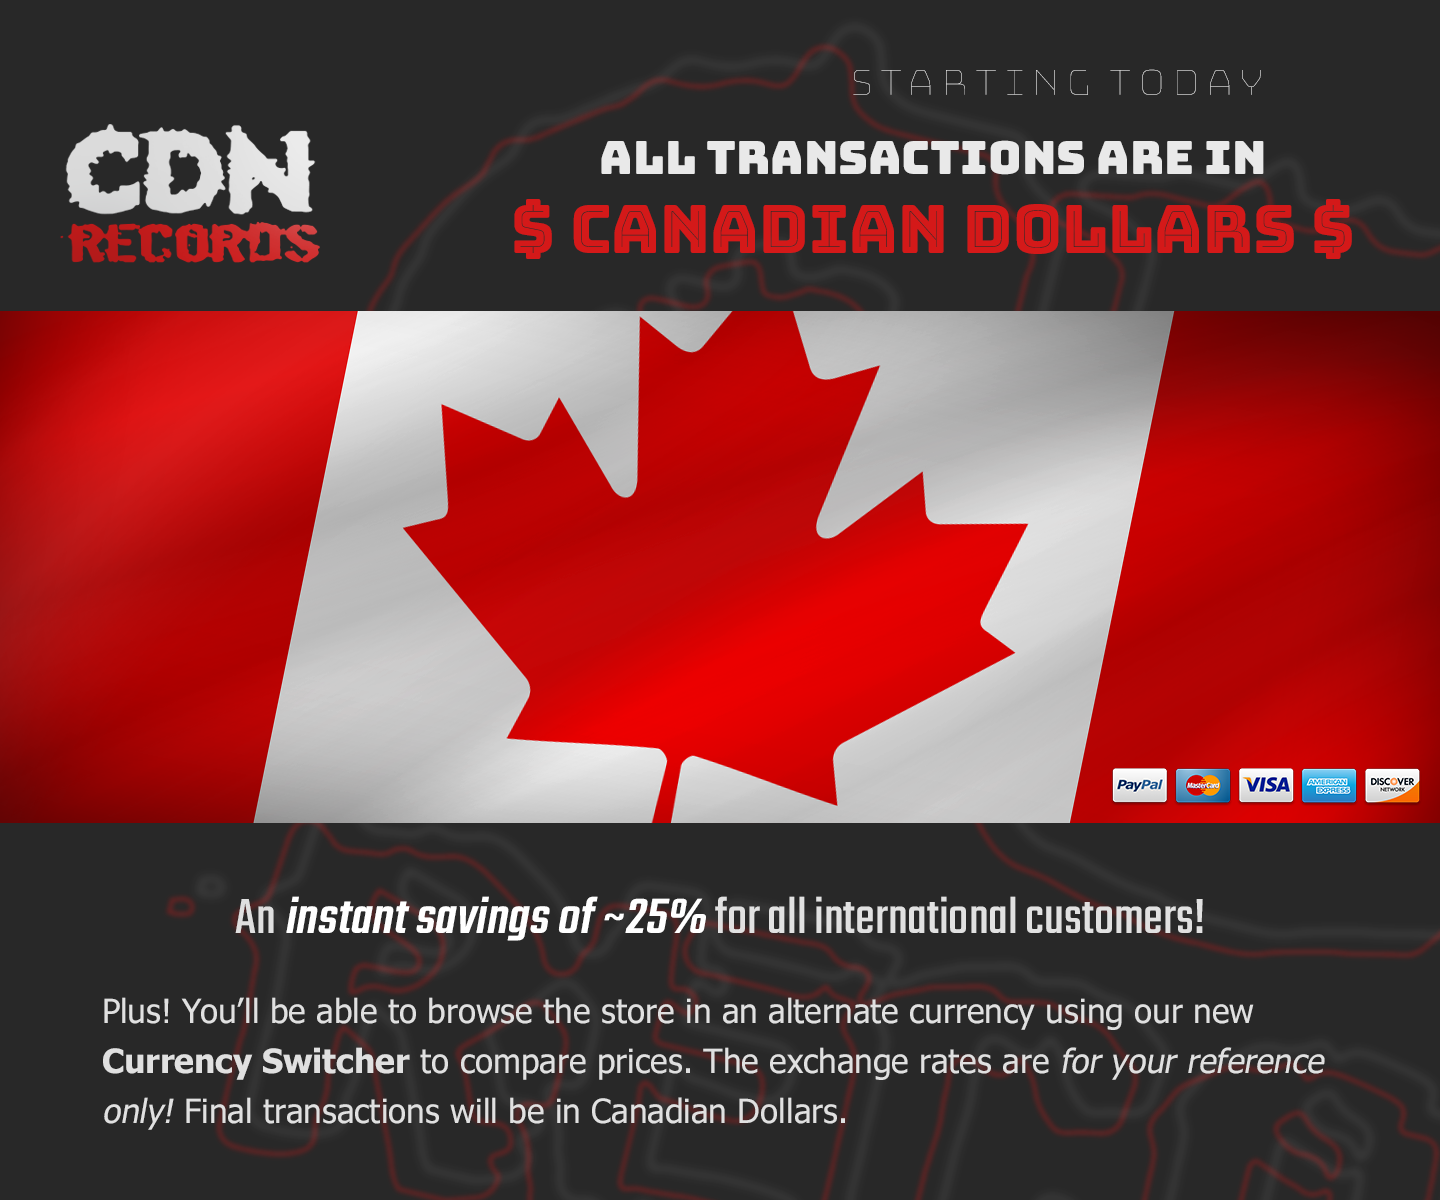 A banner image promoting all transactions in Canadian Dollars